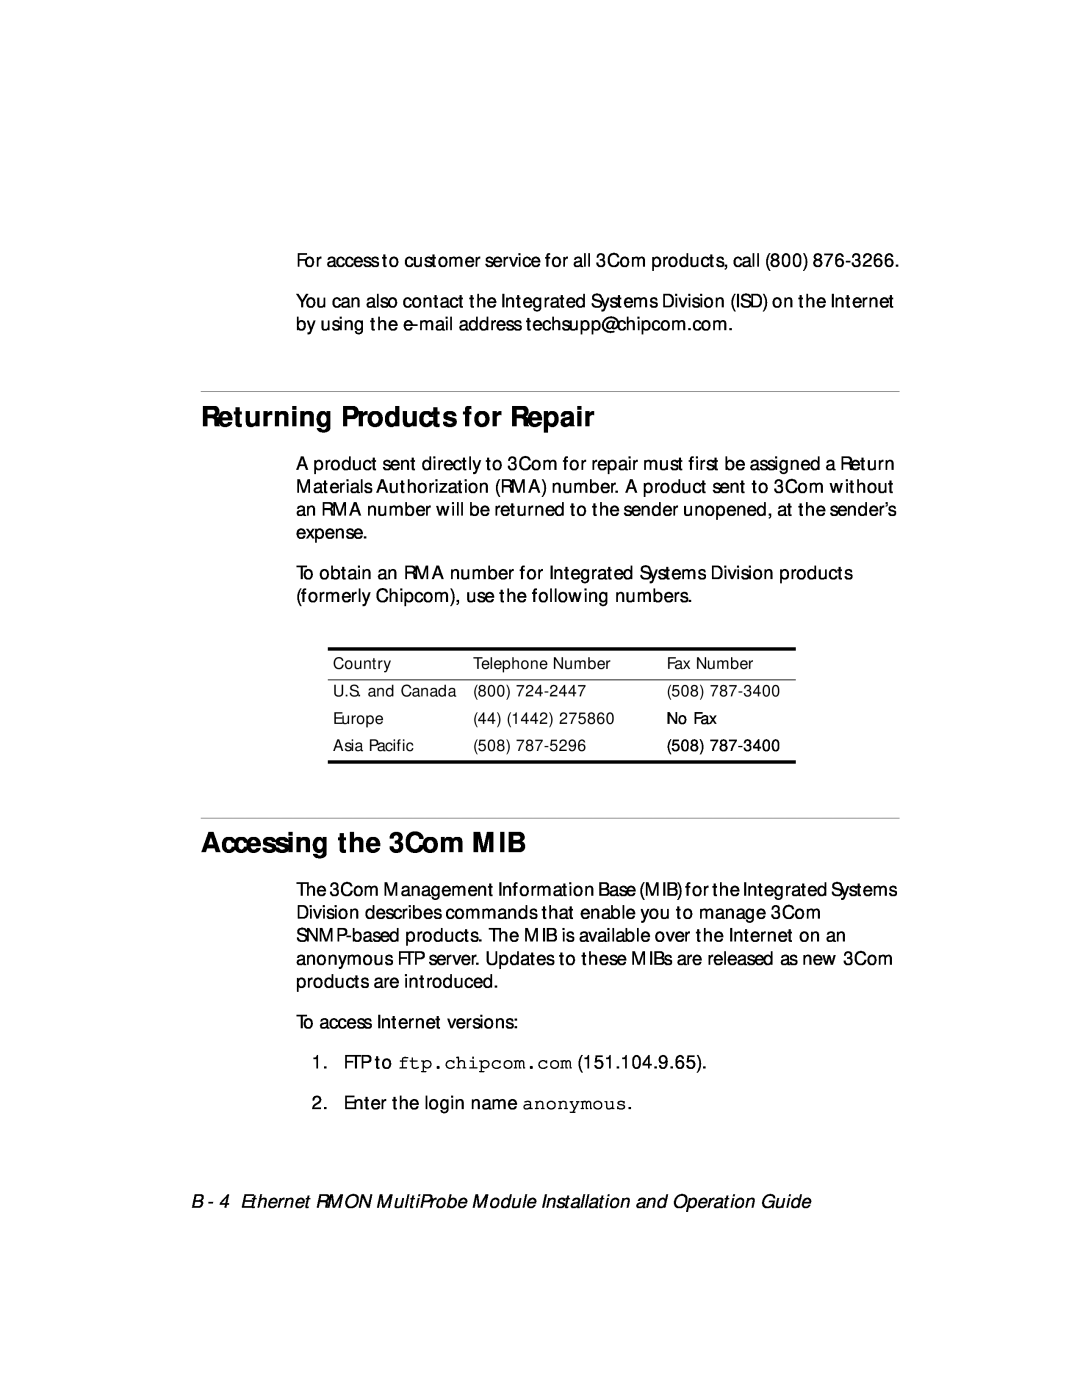 3Com RMON-EMP-3 installation and operation guide Returning Products for Repair, Accessing the 3Com MIB 